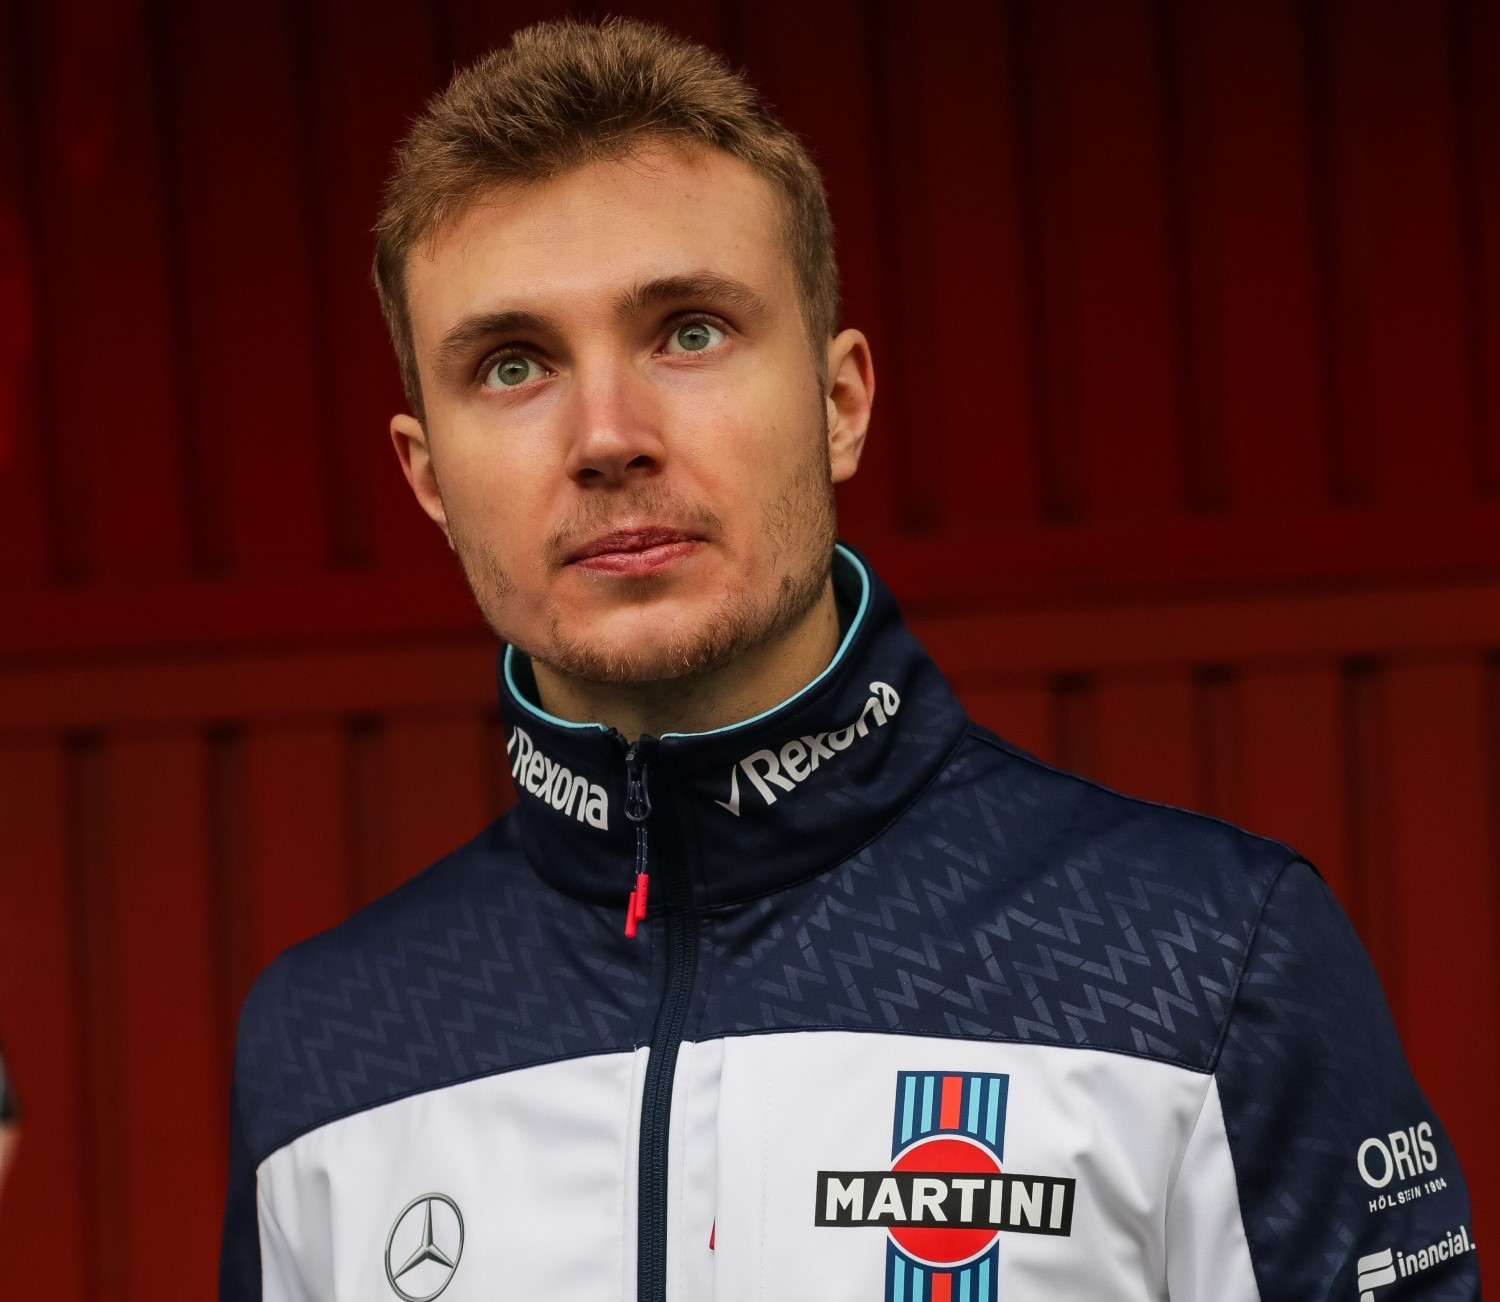 Willans throws Sergey Sirotkin a bone for all the money he paid to be a bench warmer